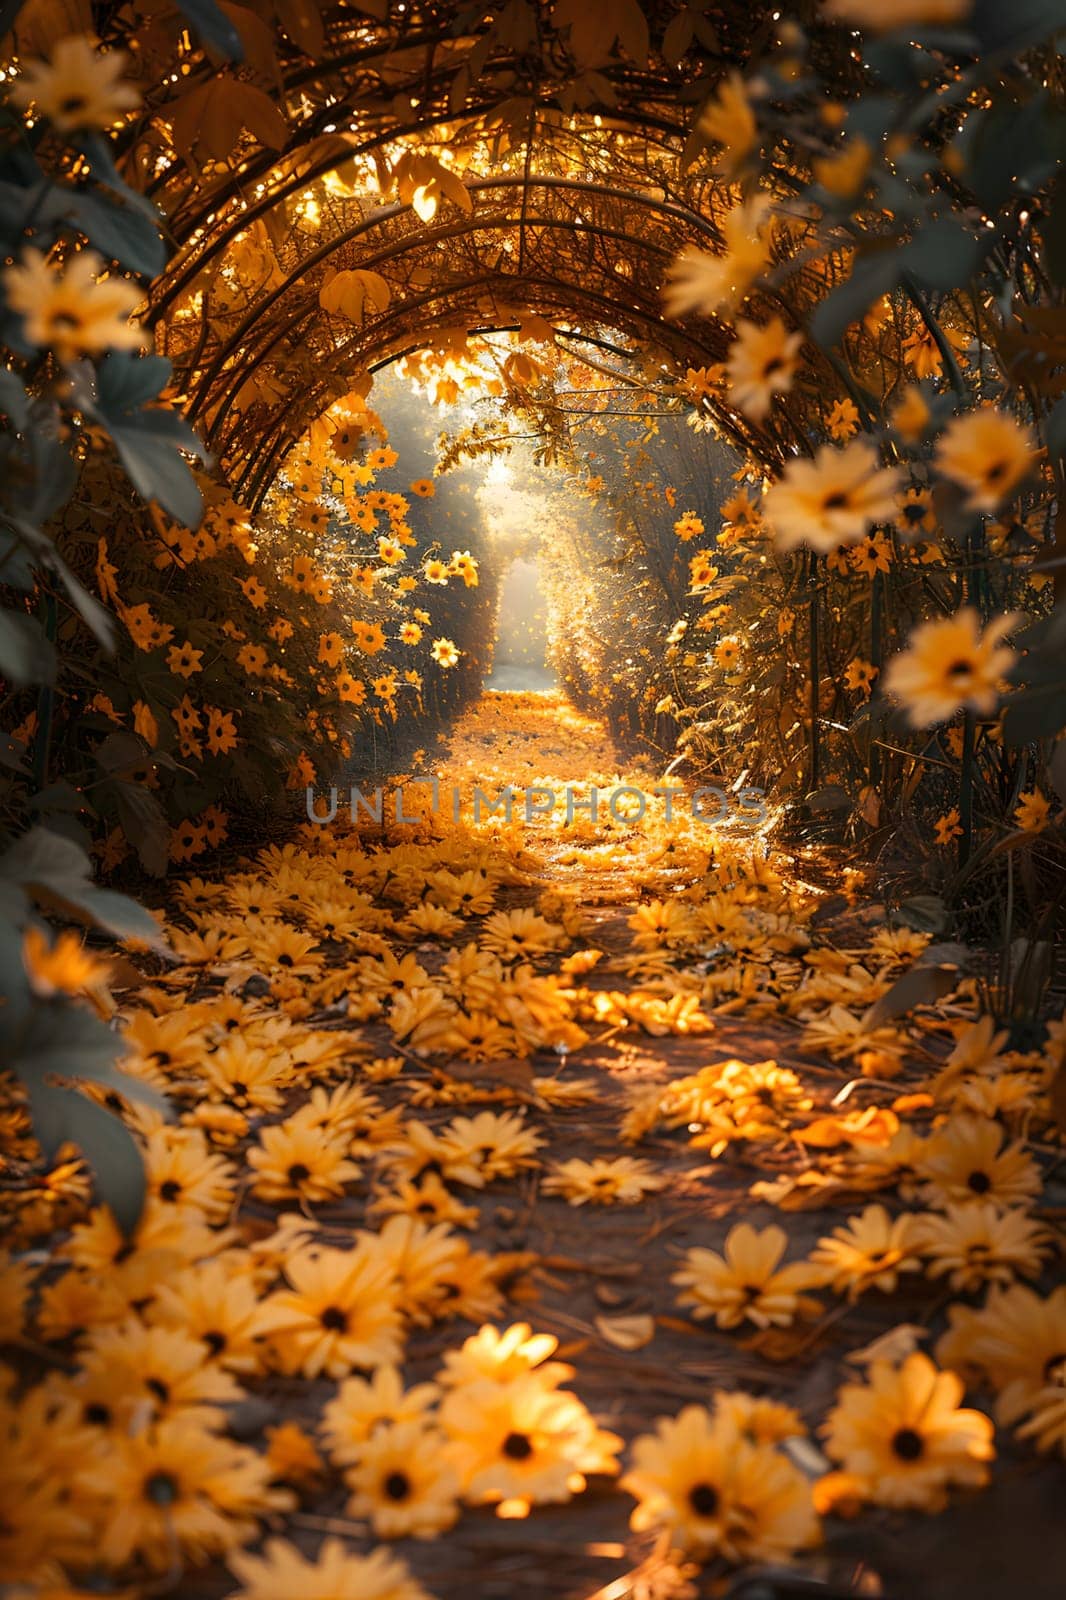 A tunnel lined with yellow flowers and leaves creates a natural landscape artwork, with sunlight filtering through the deciduous trees creating beautiful tints and shades